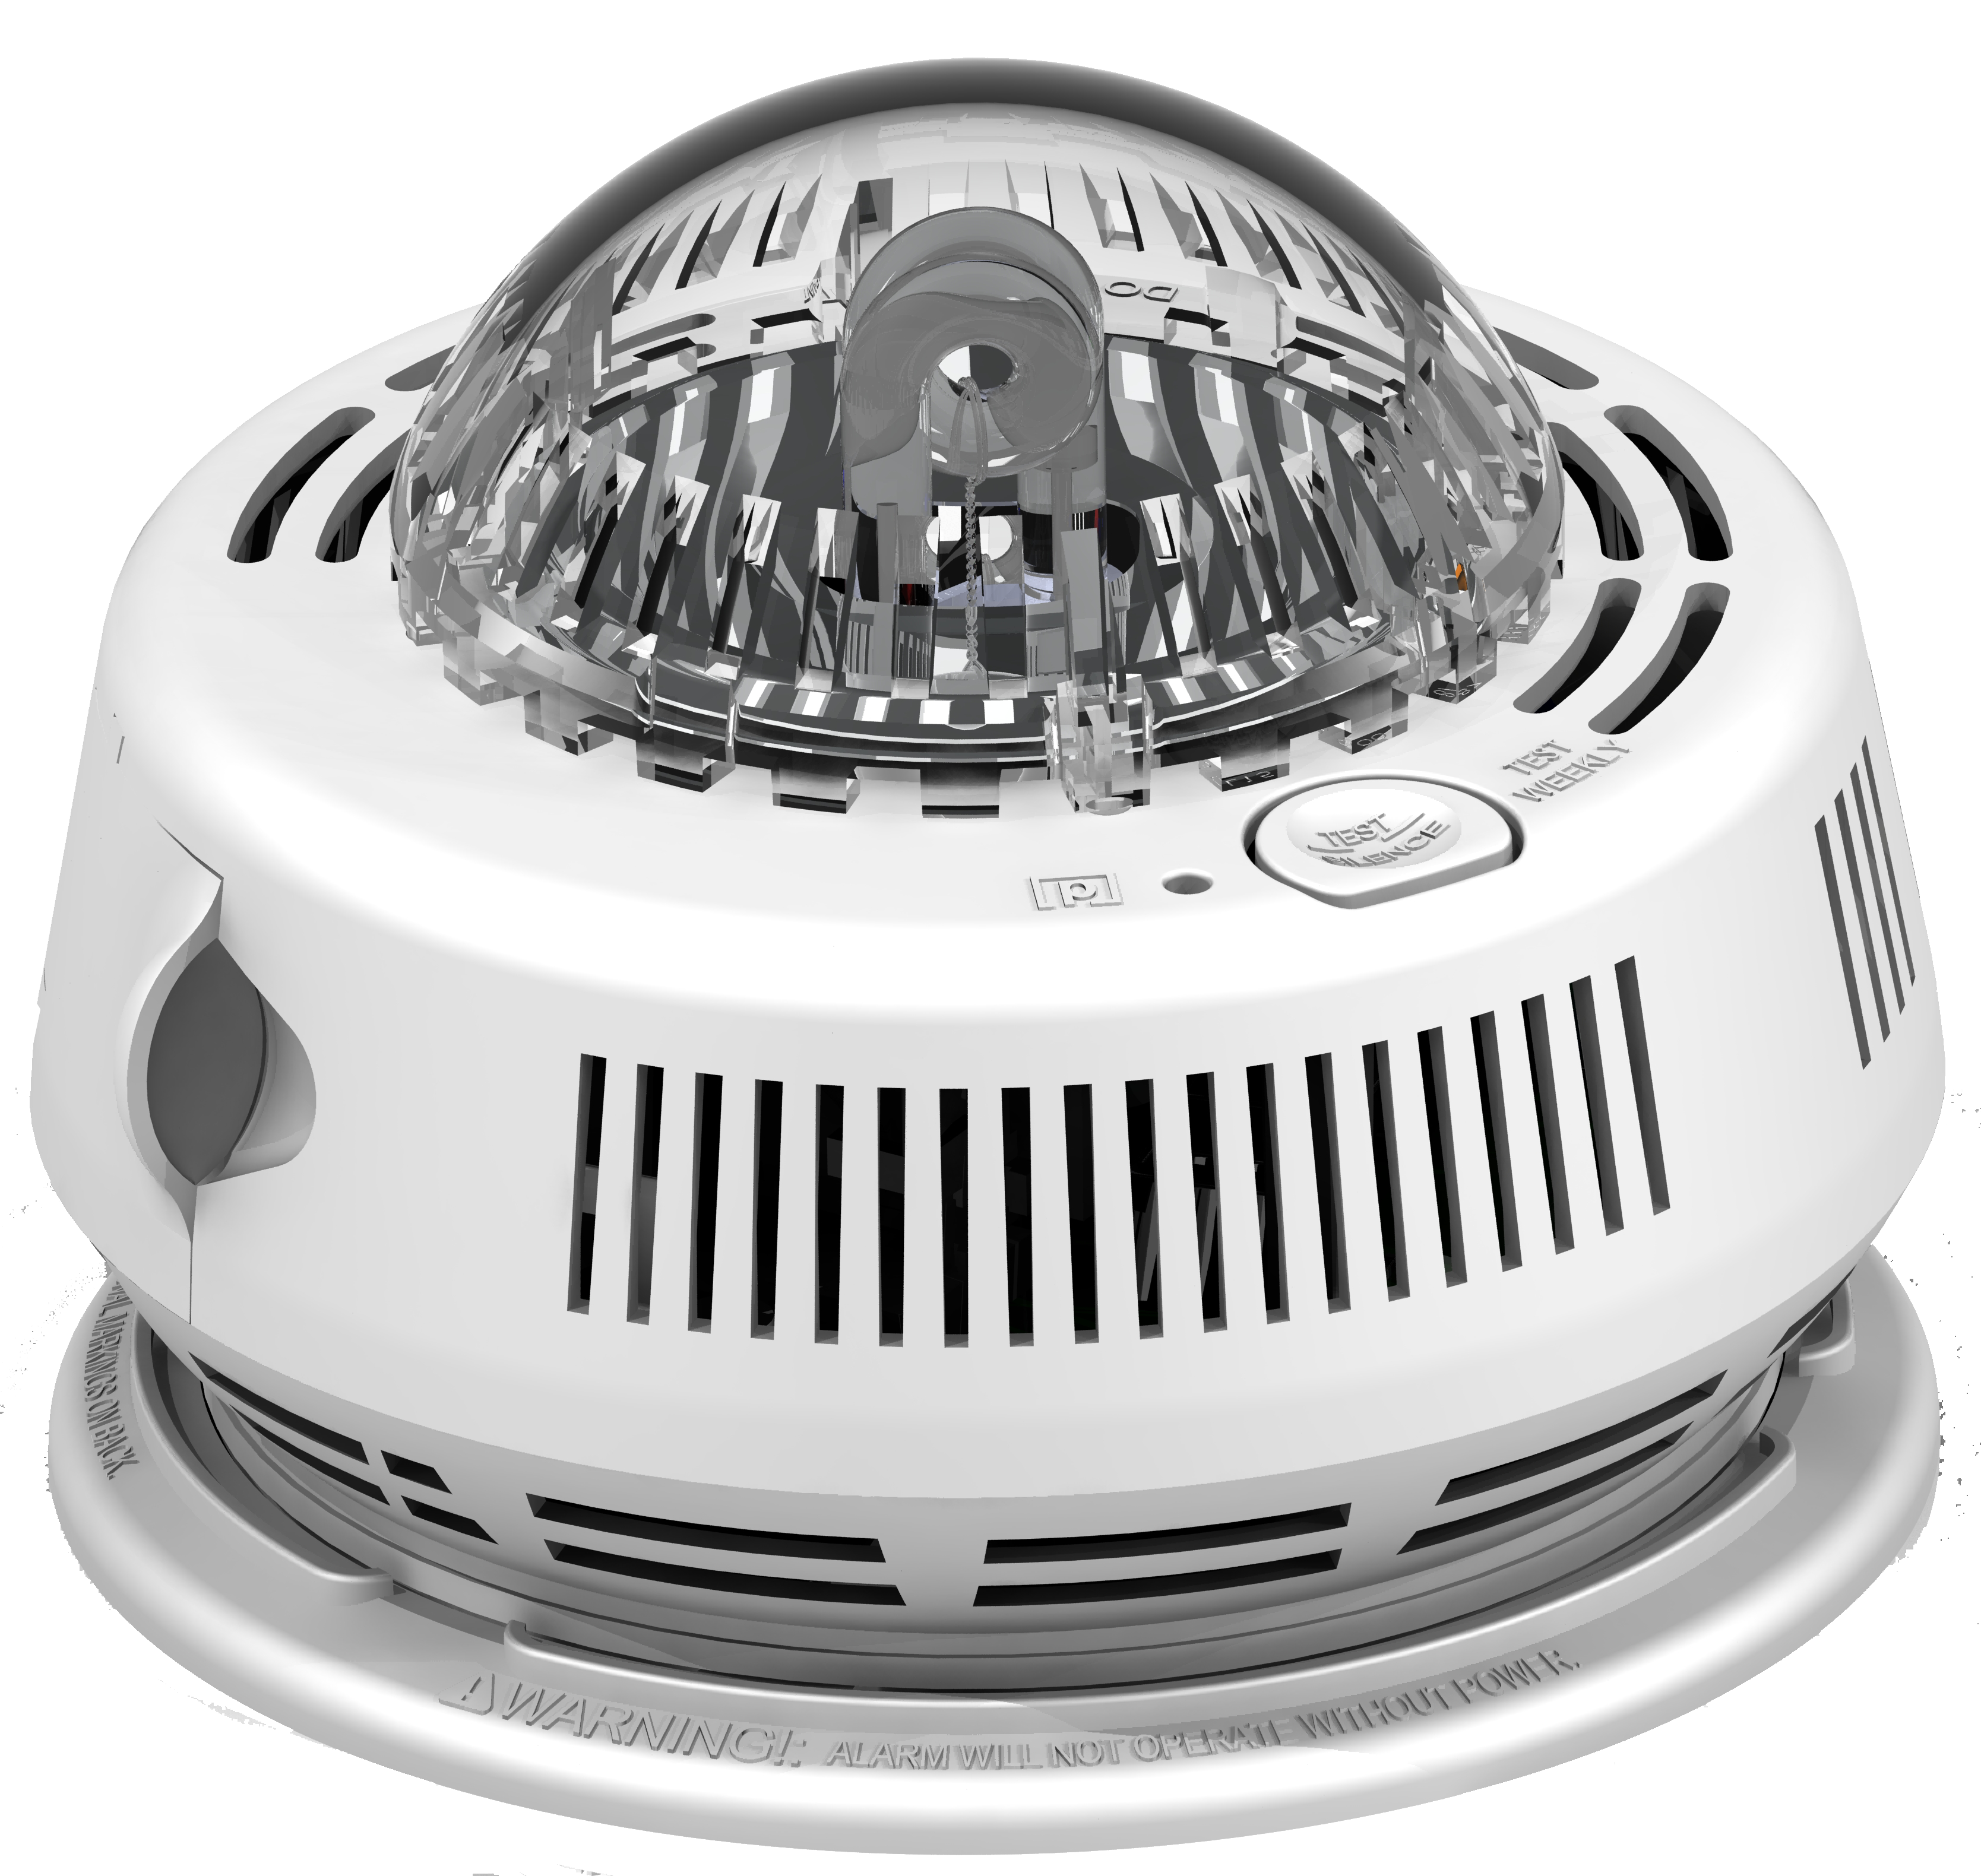 New BRK 7020BSL Combination Photoelectric Smoke Alarm And LED Strobe 1038335 